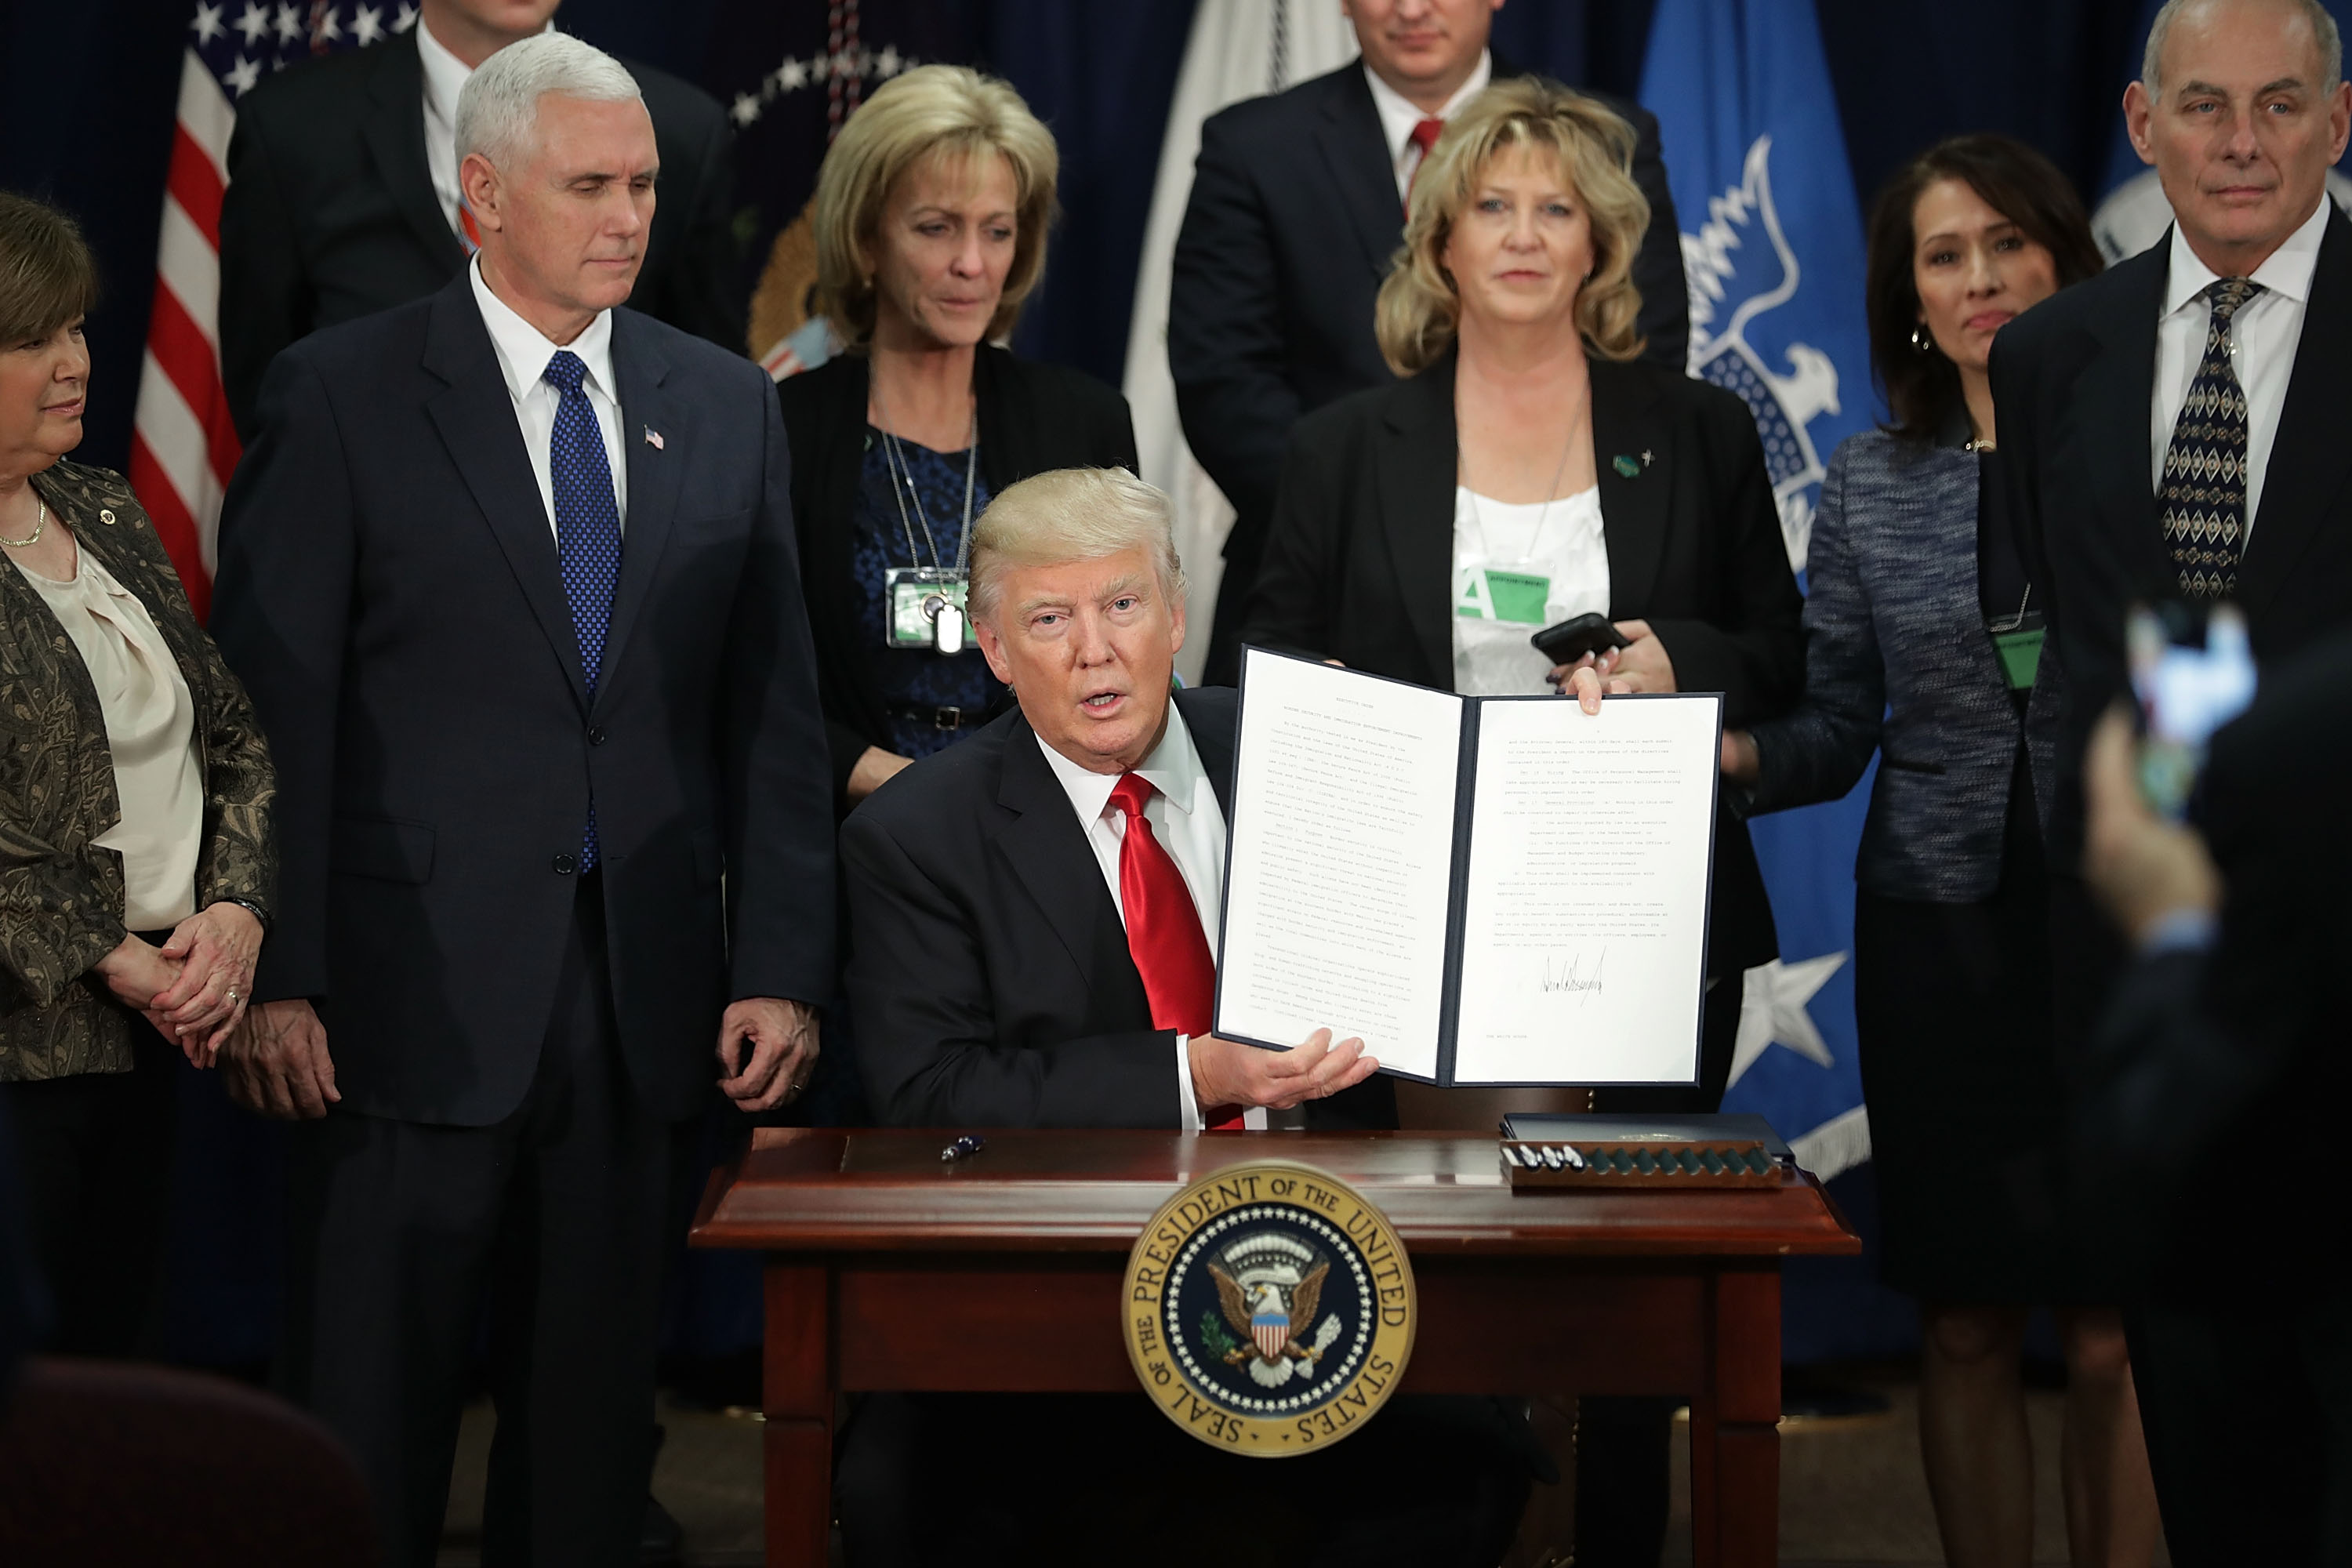 Trump’s Executive Orders on Immigration Met With Criticism and Resistance